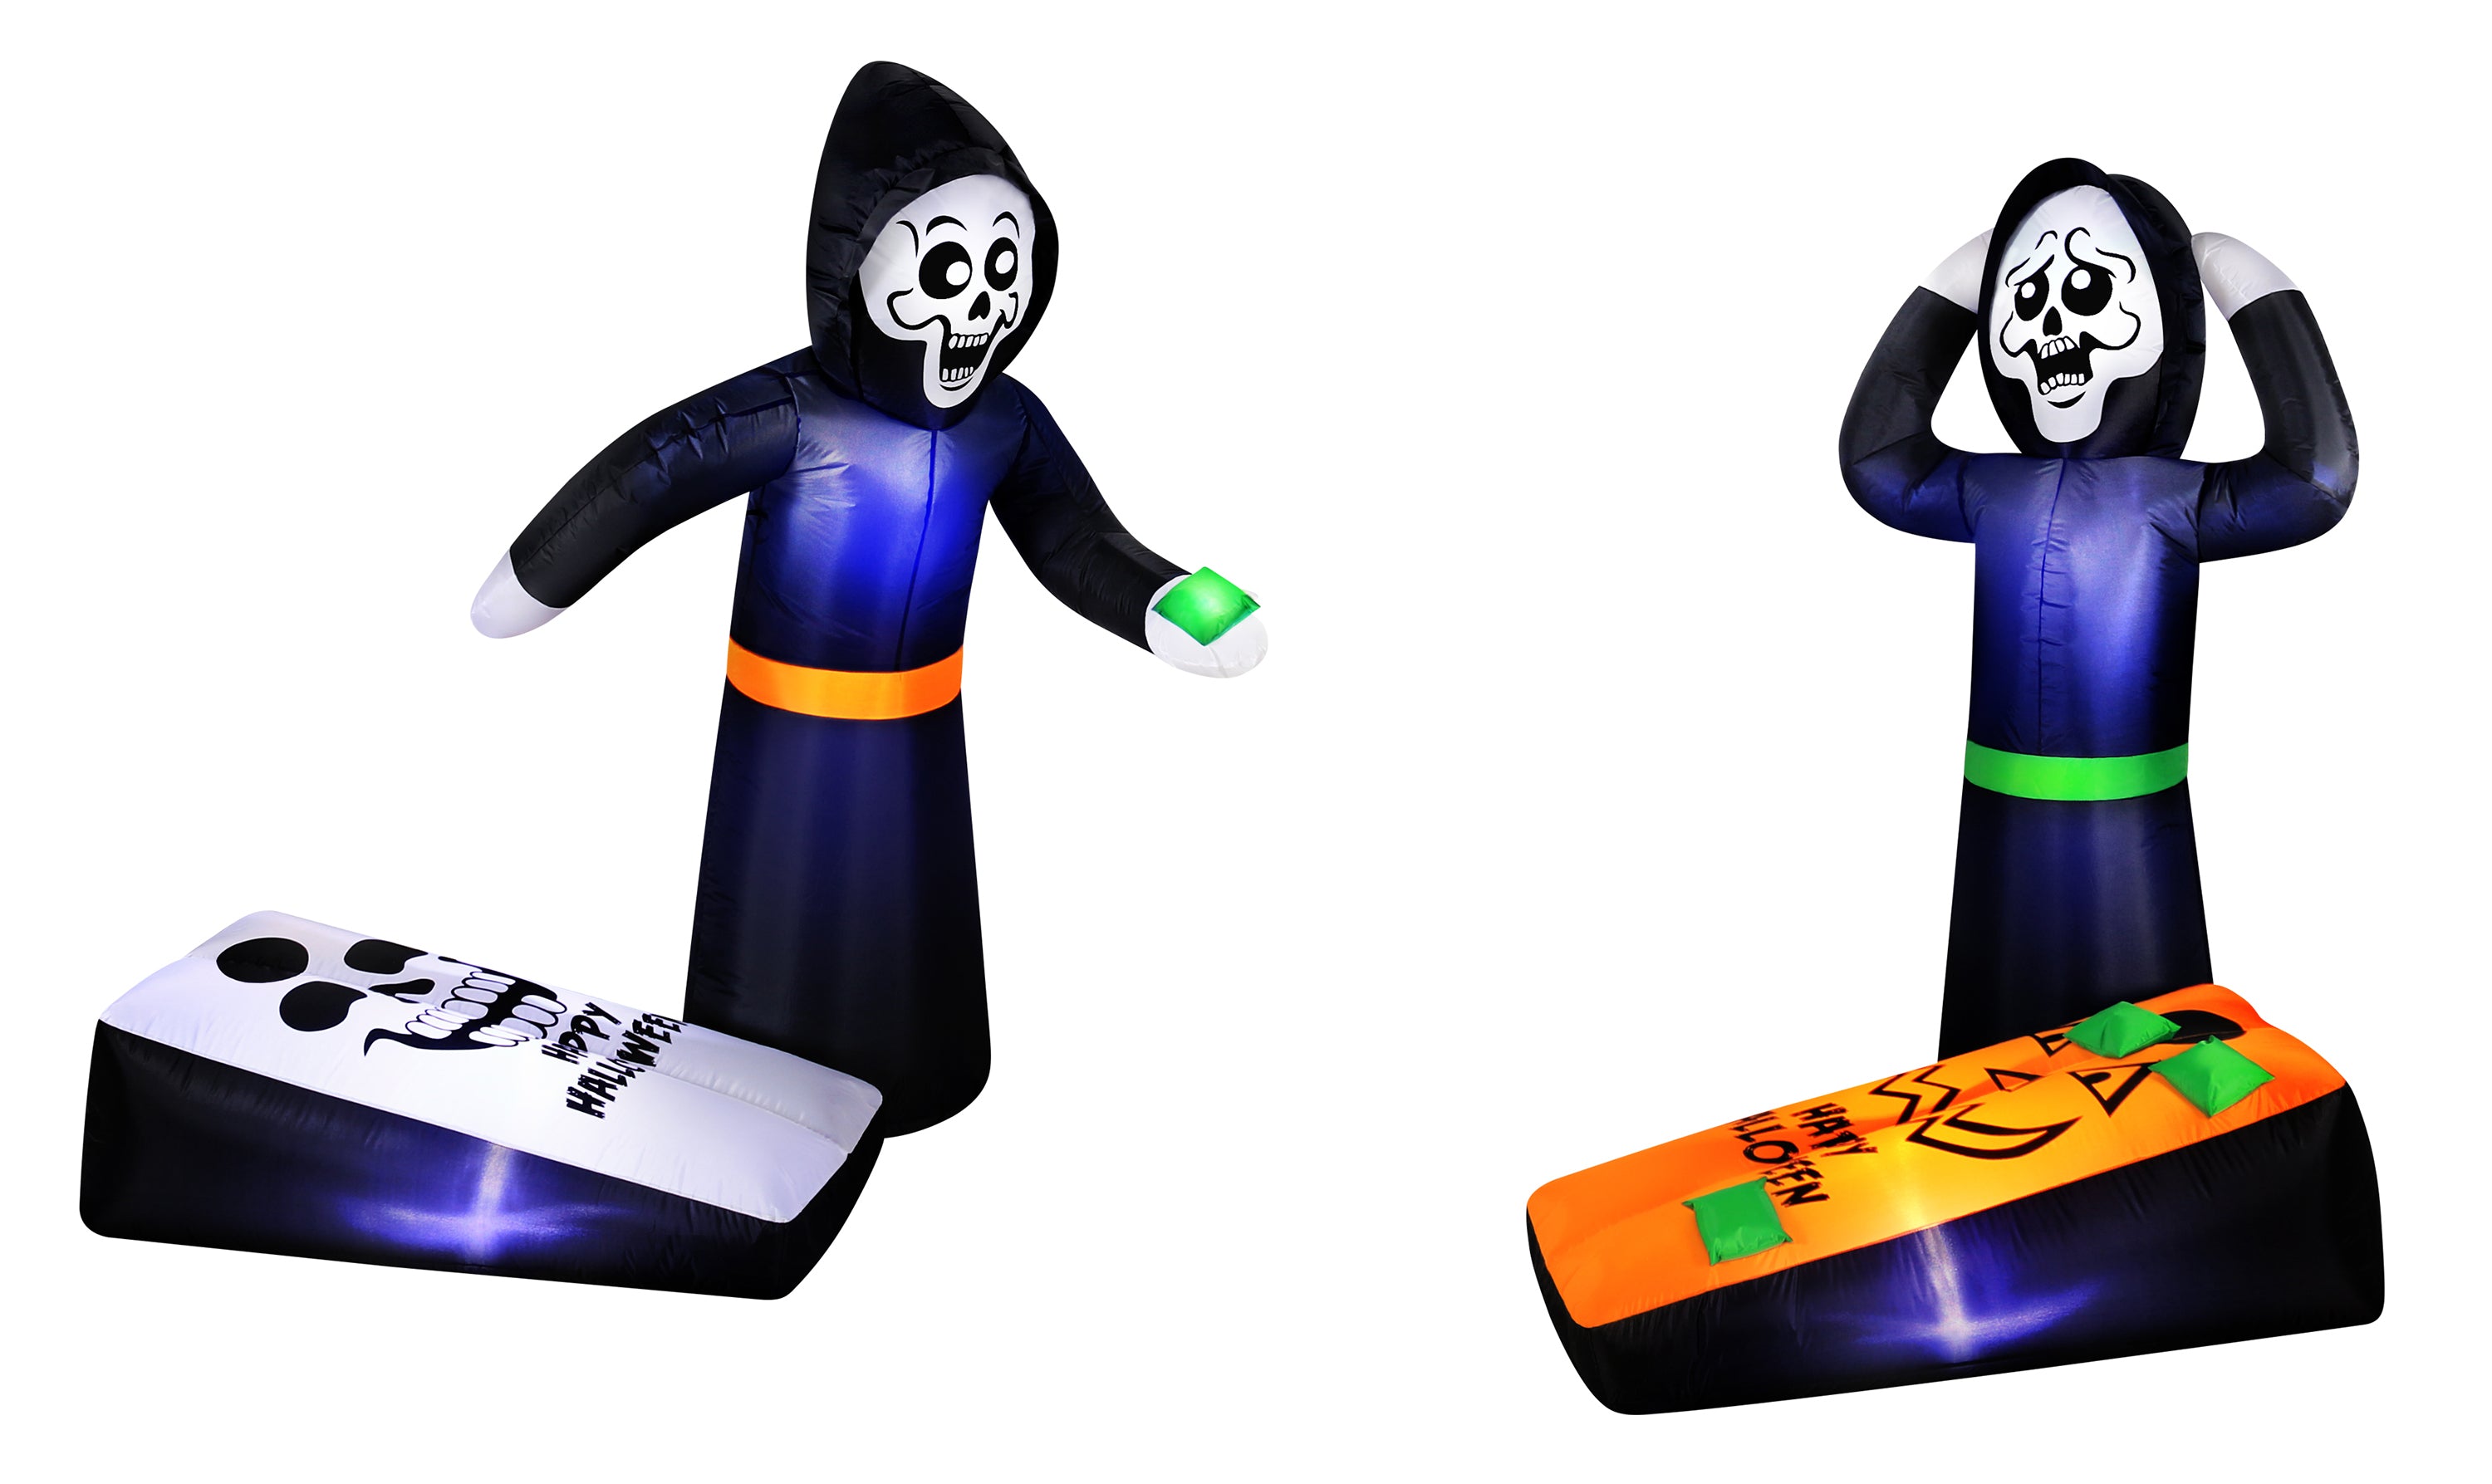 Occasions 5' INFLATABLE REAPERS PLAYING CORN HOLE, 5 ft Tall, Multicolored